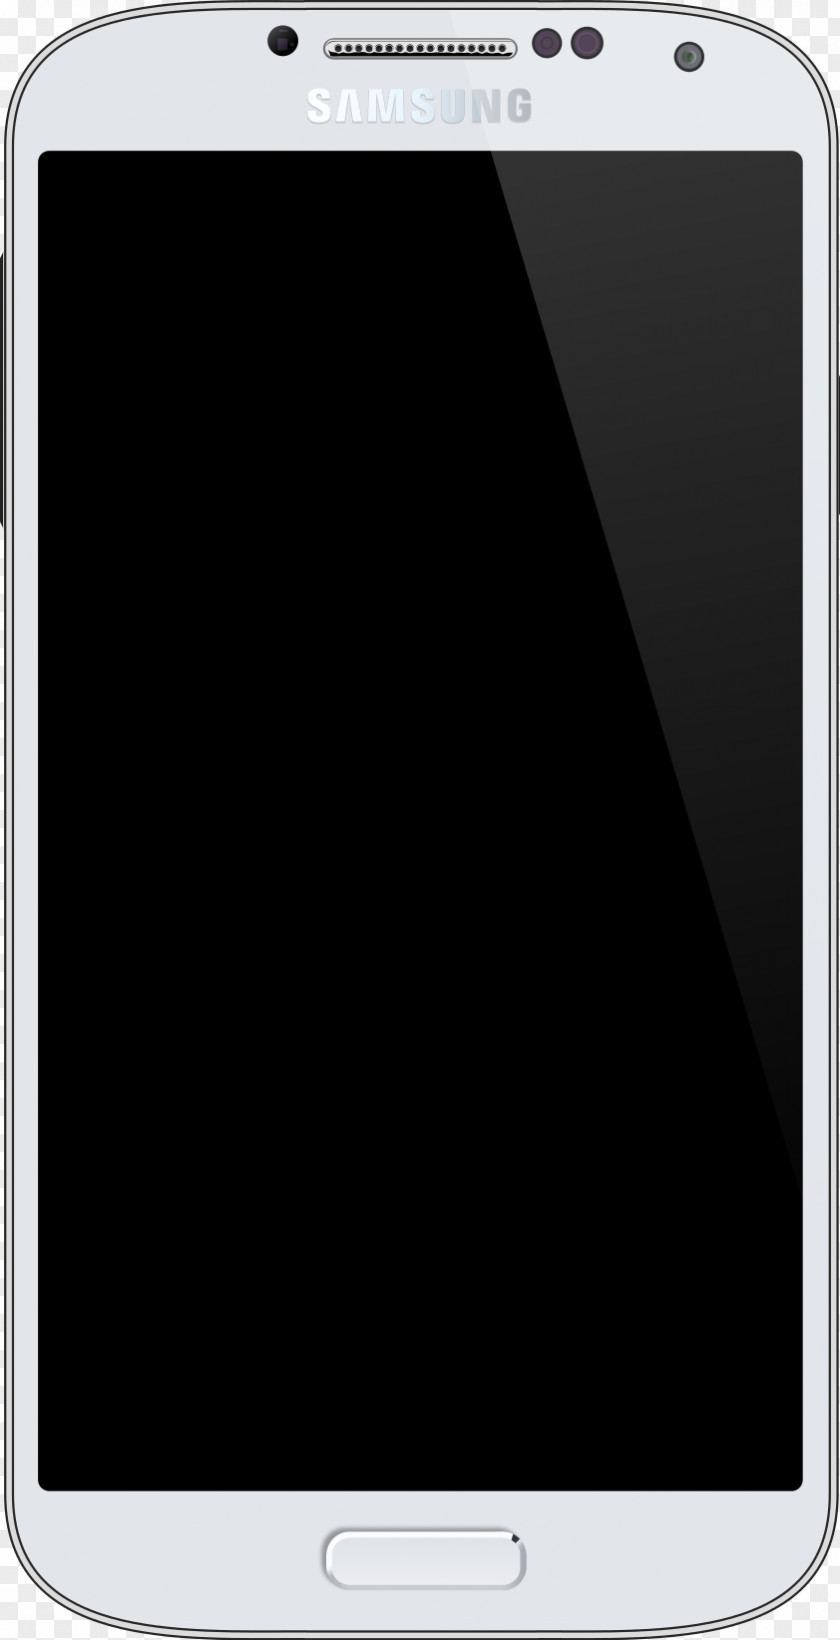 Samsung IPhone 6s Plus 7 IPod Touch Telephone PNG